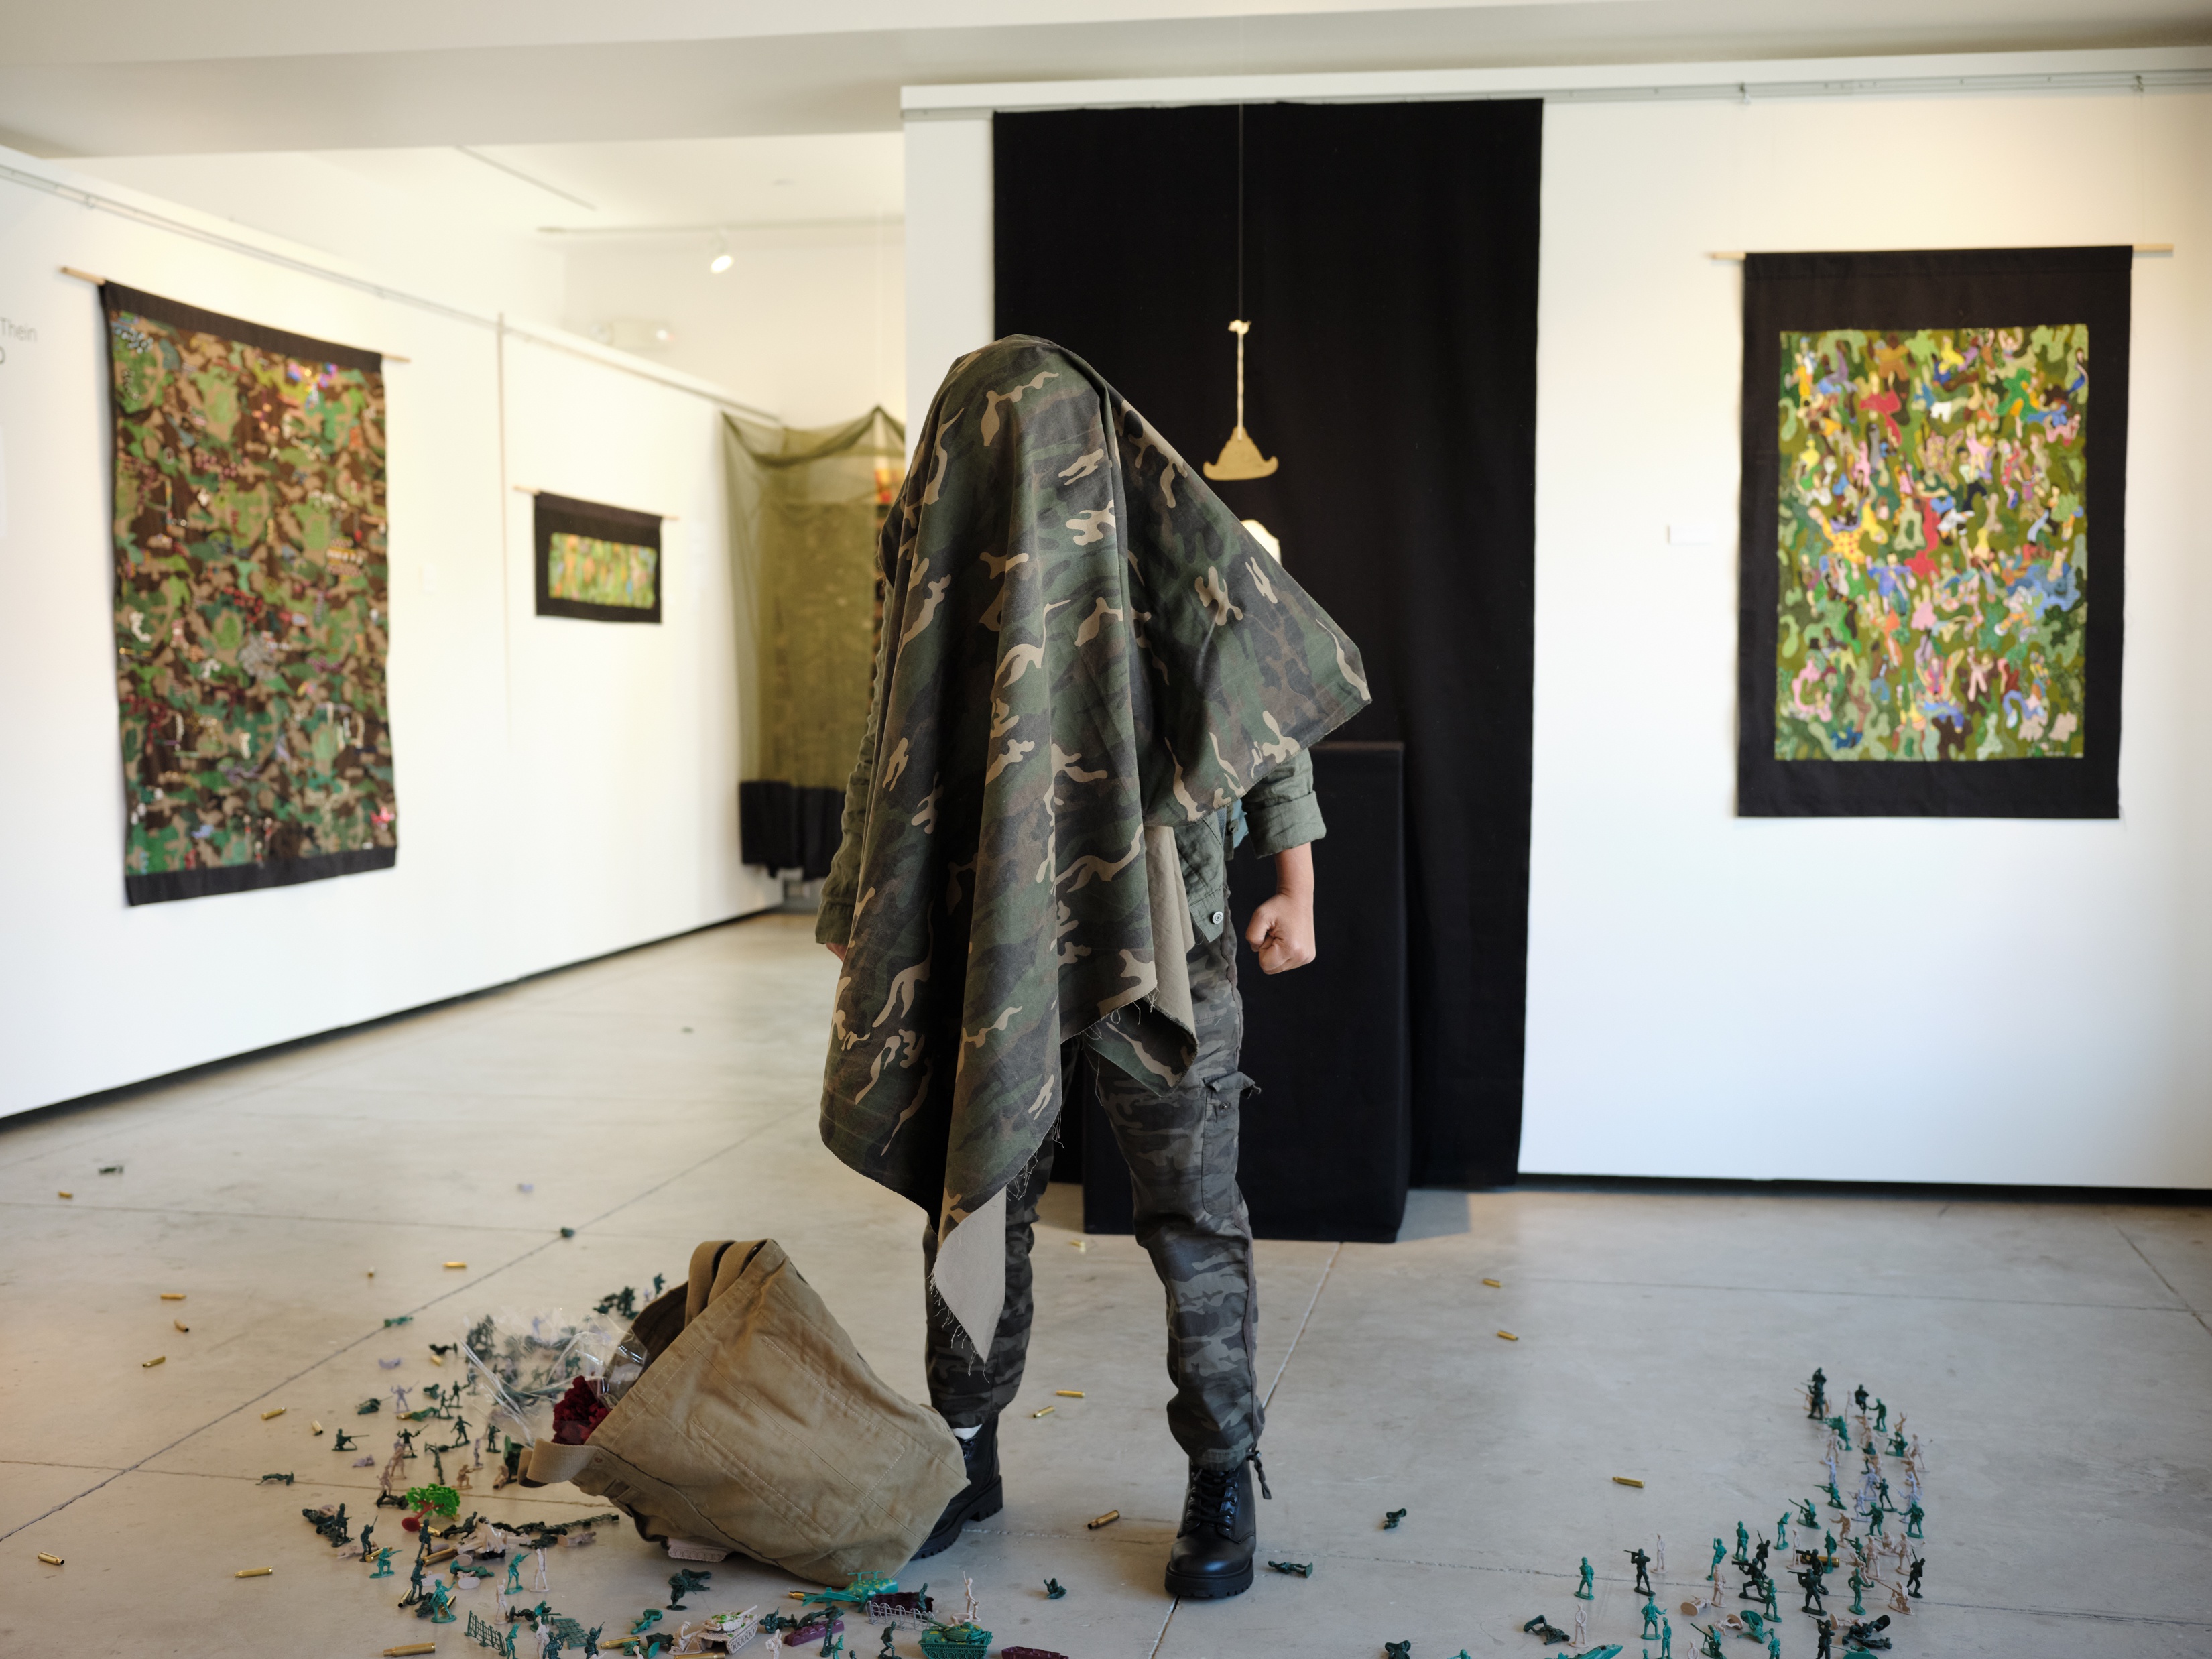 Artist shrouded in camouflage garb